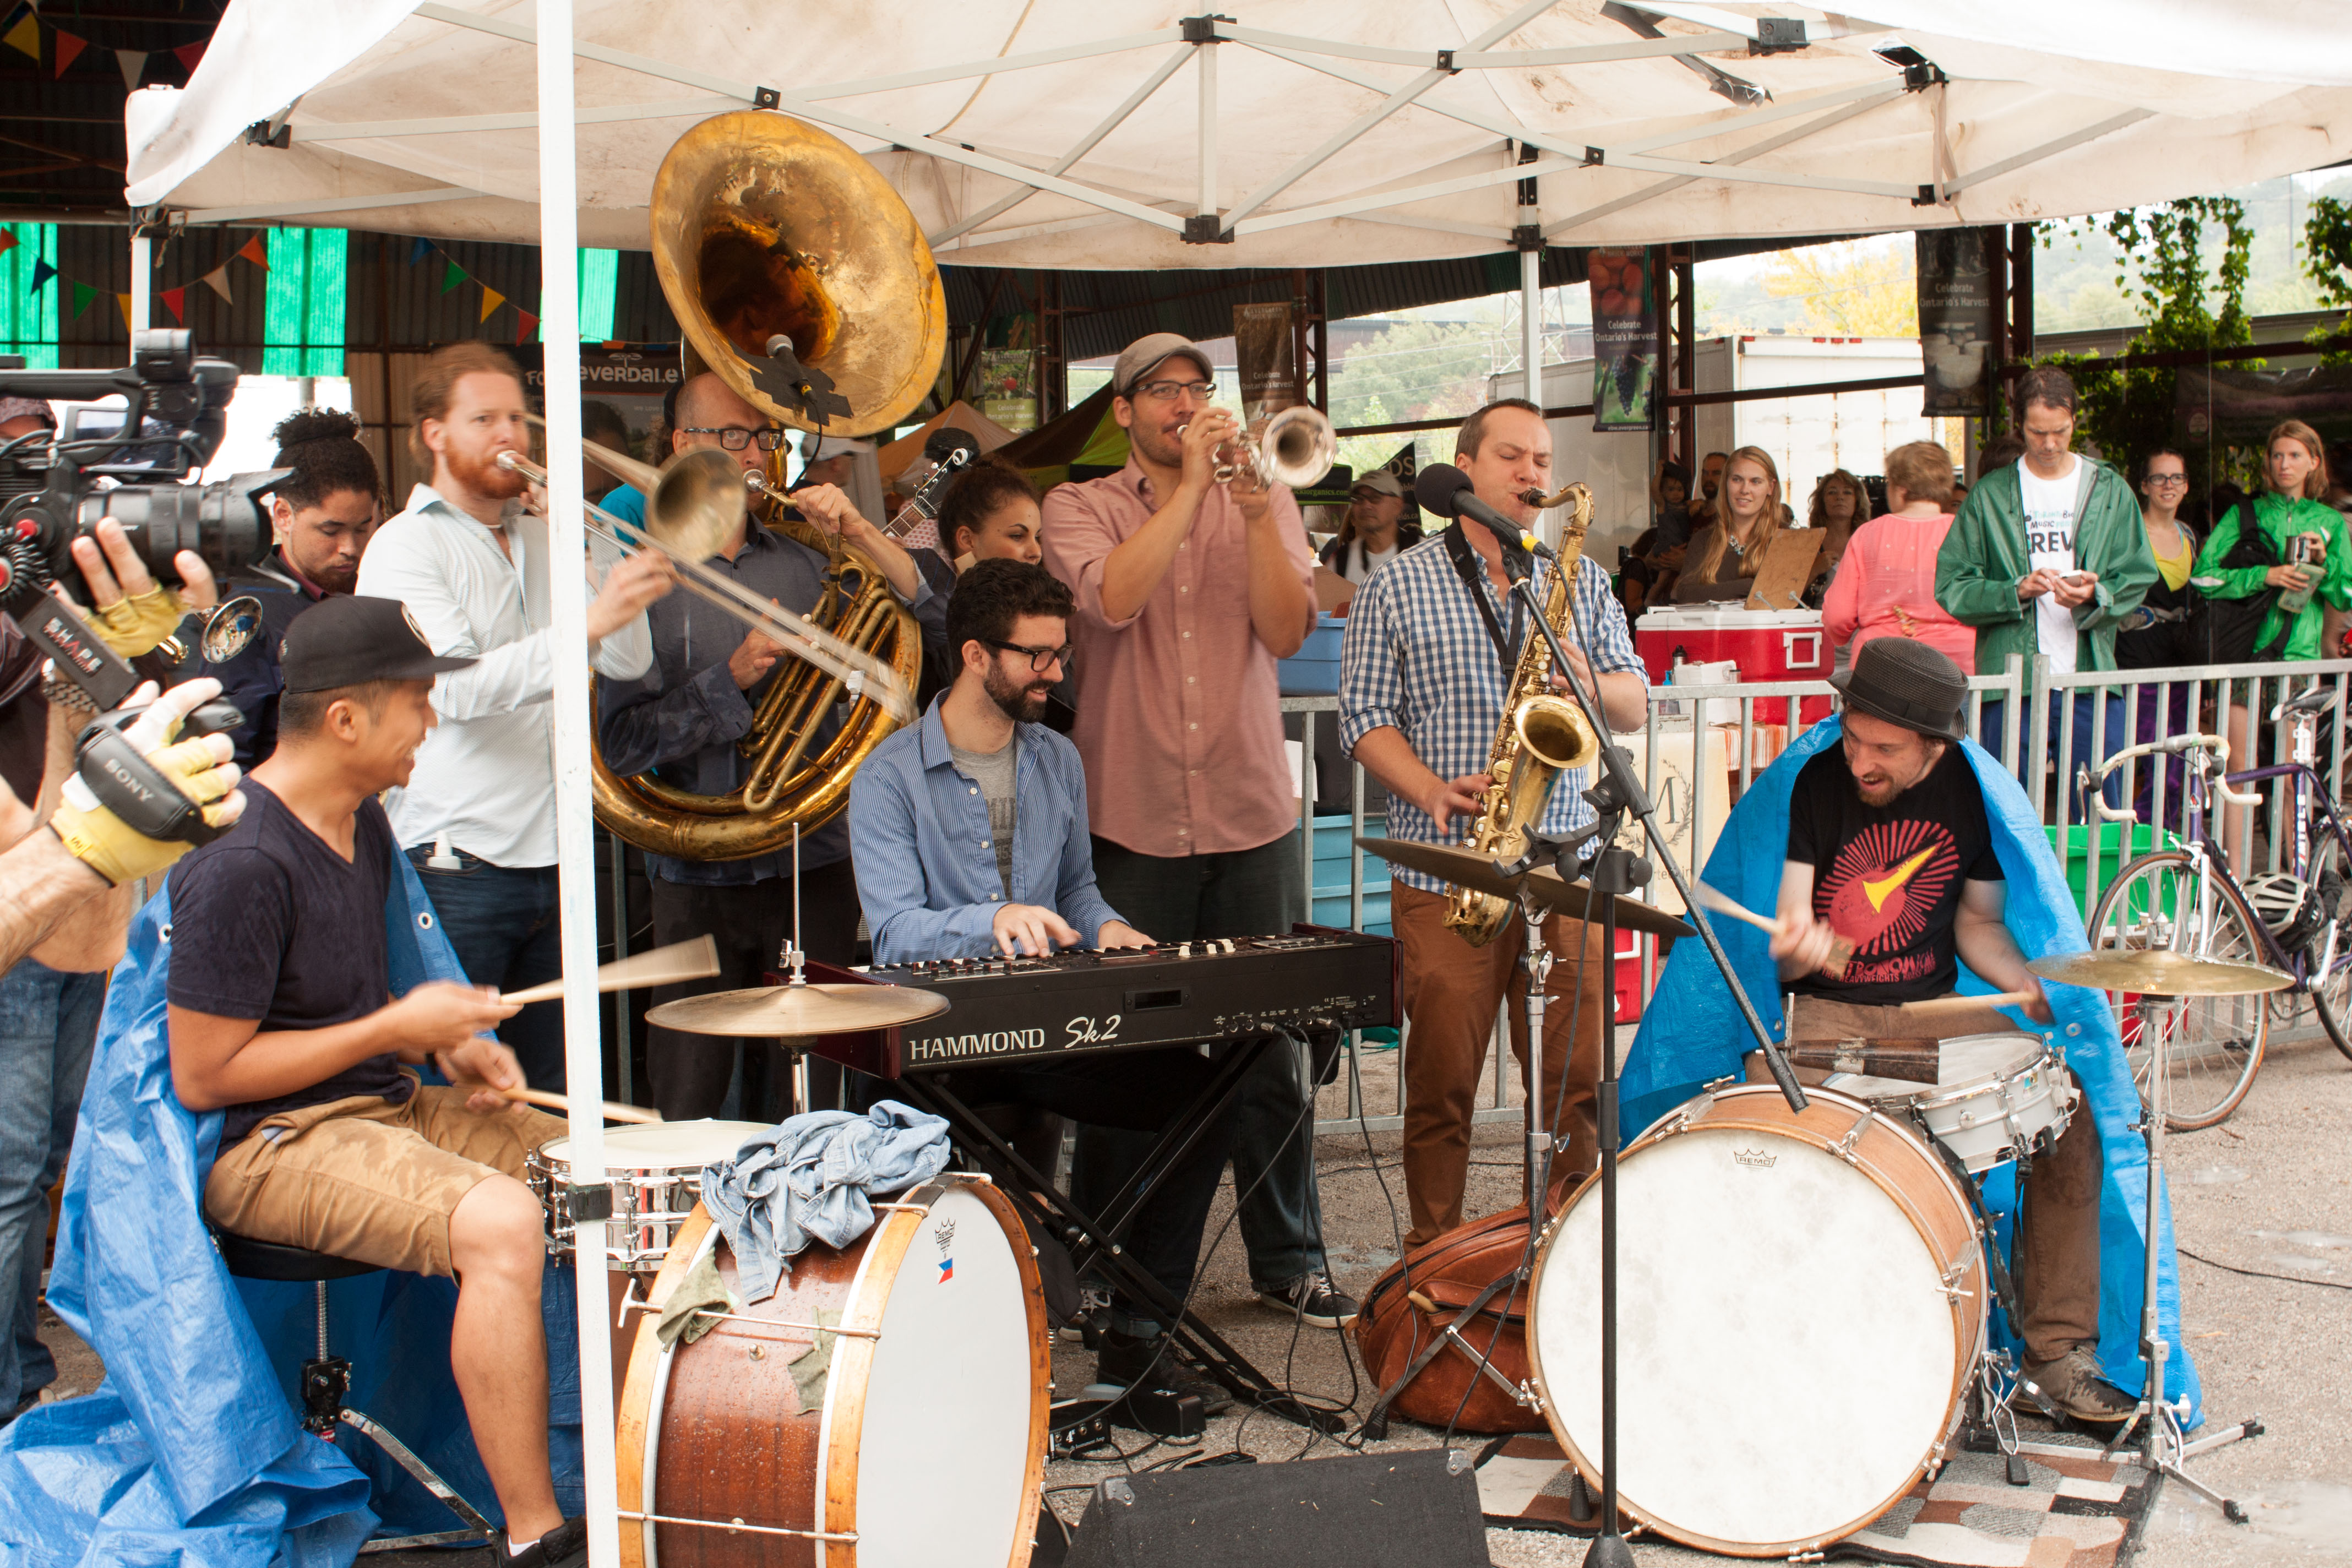 Image description: a band plays various instruments and smiles as they perform under a tent.